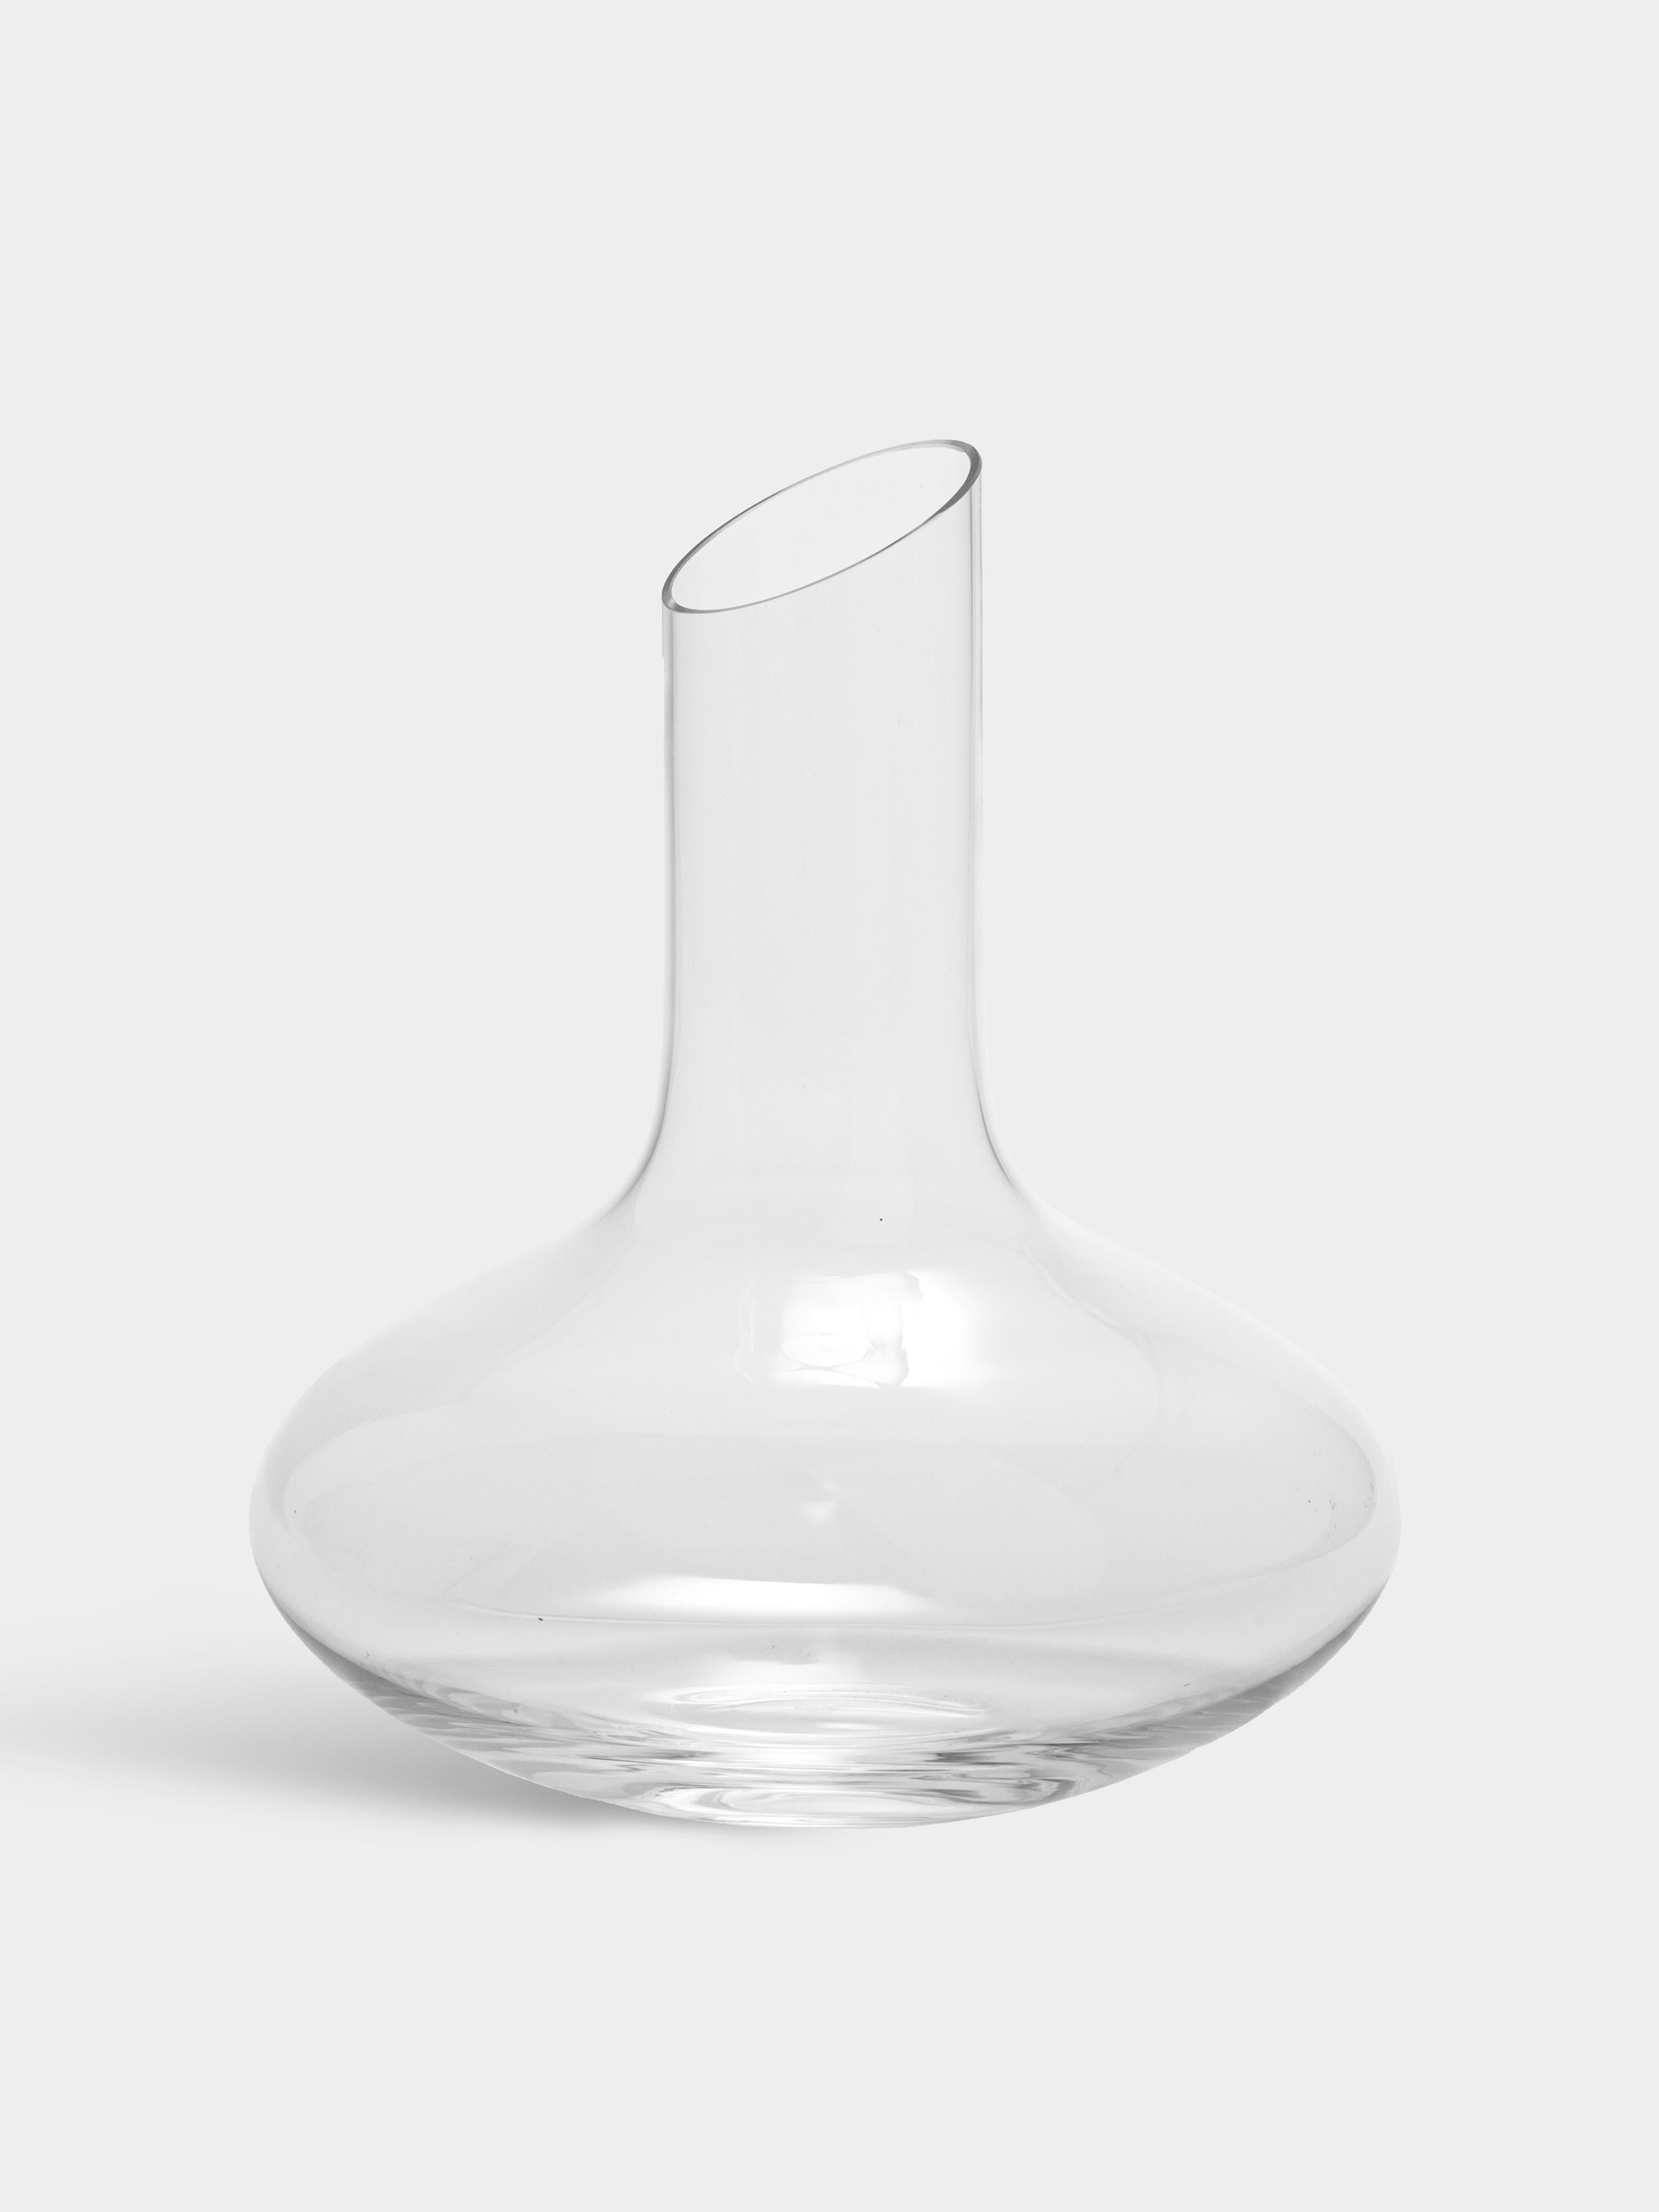 Enjoy Decanter from Orrefors, holding 34 oz, has a bowl-shape with a tapered neck, making it ideal for serving wine, as well as water. With its generous size and large diameter at the widest point, this carafe is well-suited for decanting wine.
